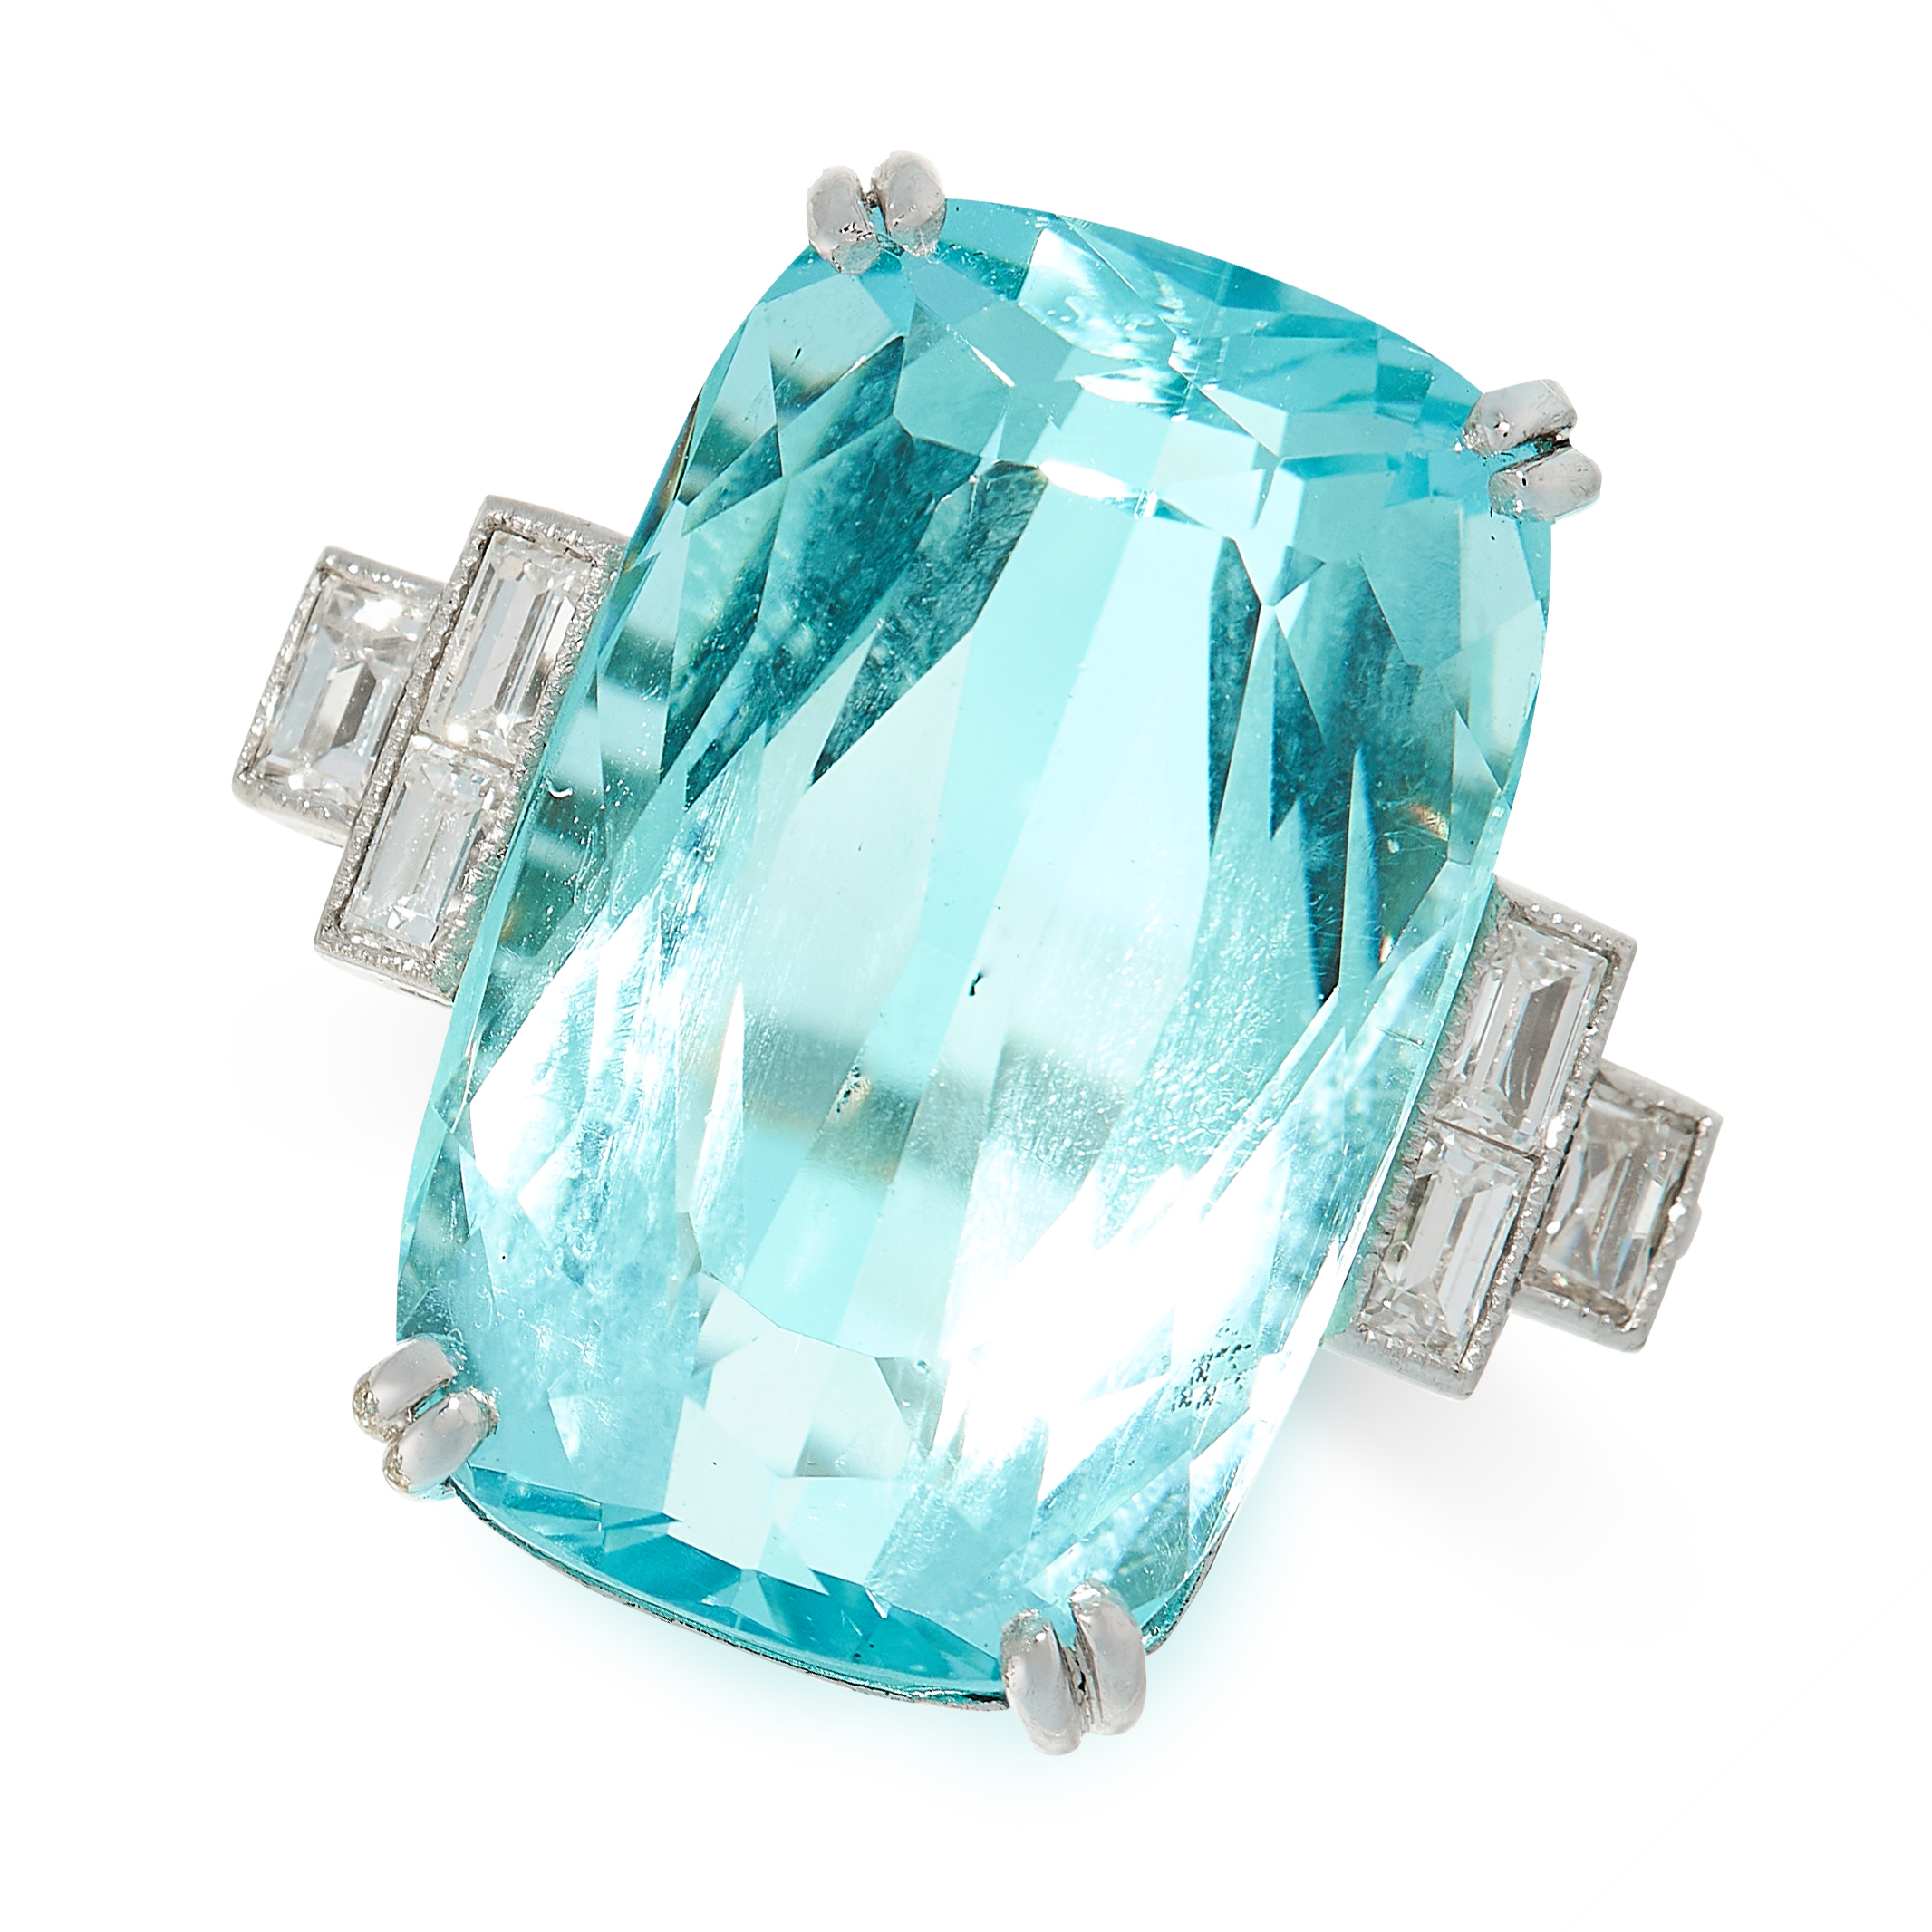 AQUAMARINE AND DIAMOND RING claw set with a cushion shaped aquamarine of 17.94 carats, accented by